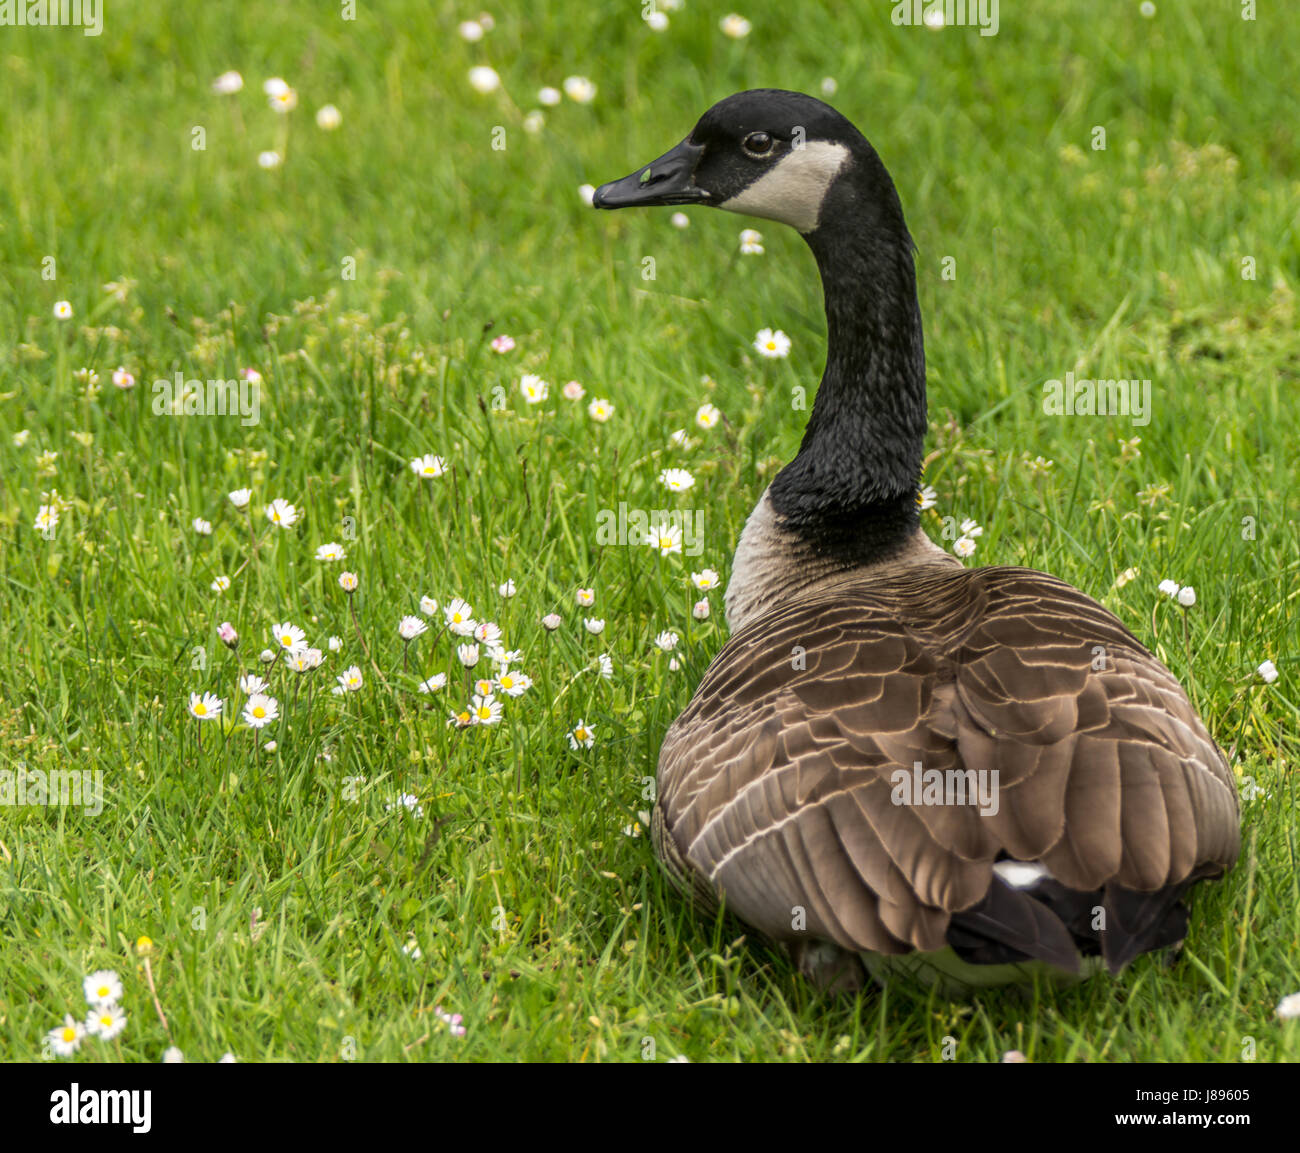 An adult Canada Goose eating some grass and flowers. Stock Photo